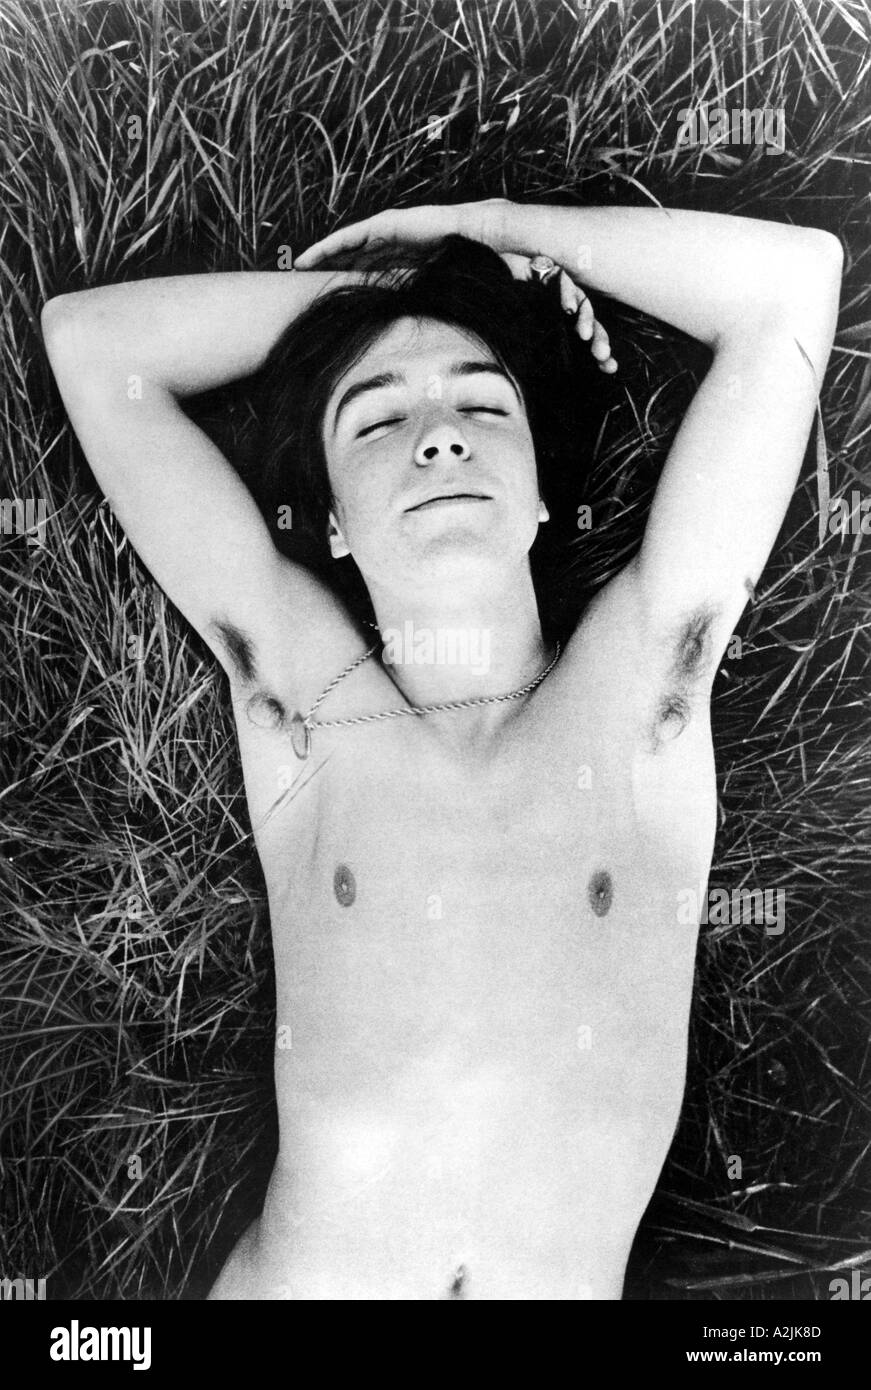 DAVID CASSIDY promotional photo of US singer actor Stock Photo